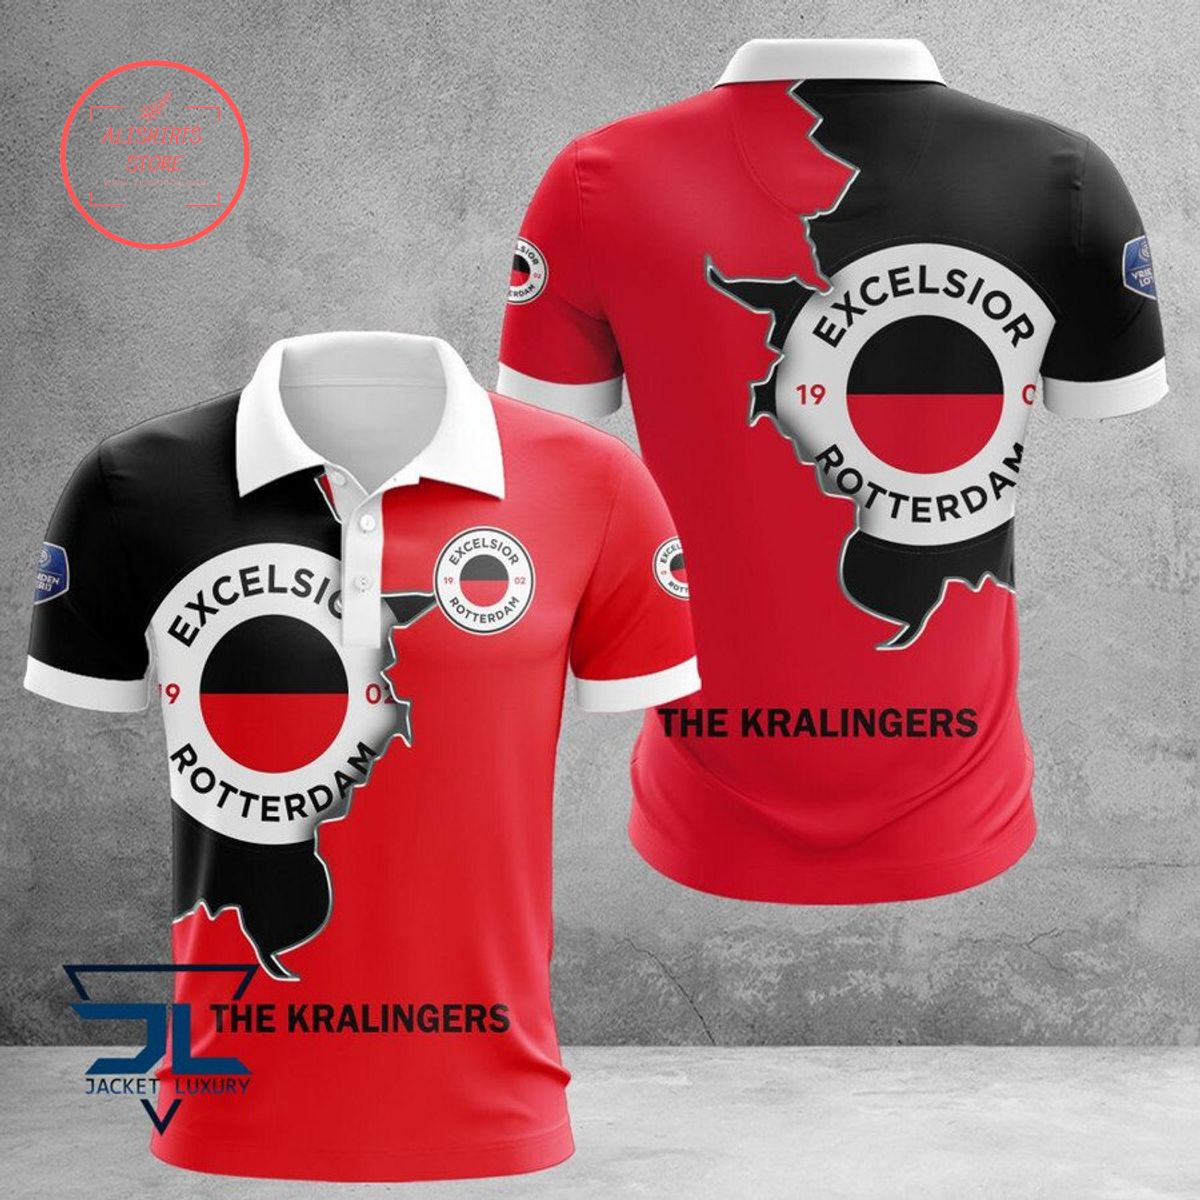 Excelsior Rotterdam Polo Shirt